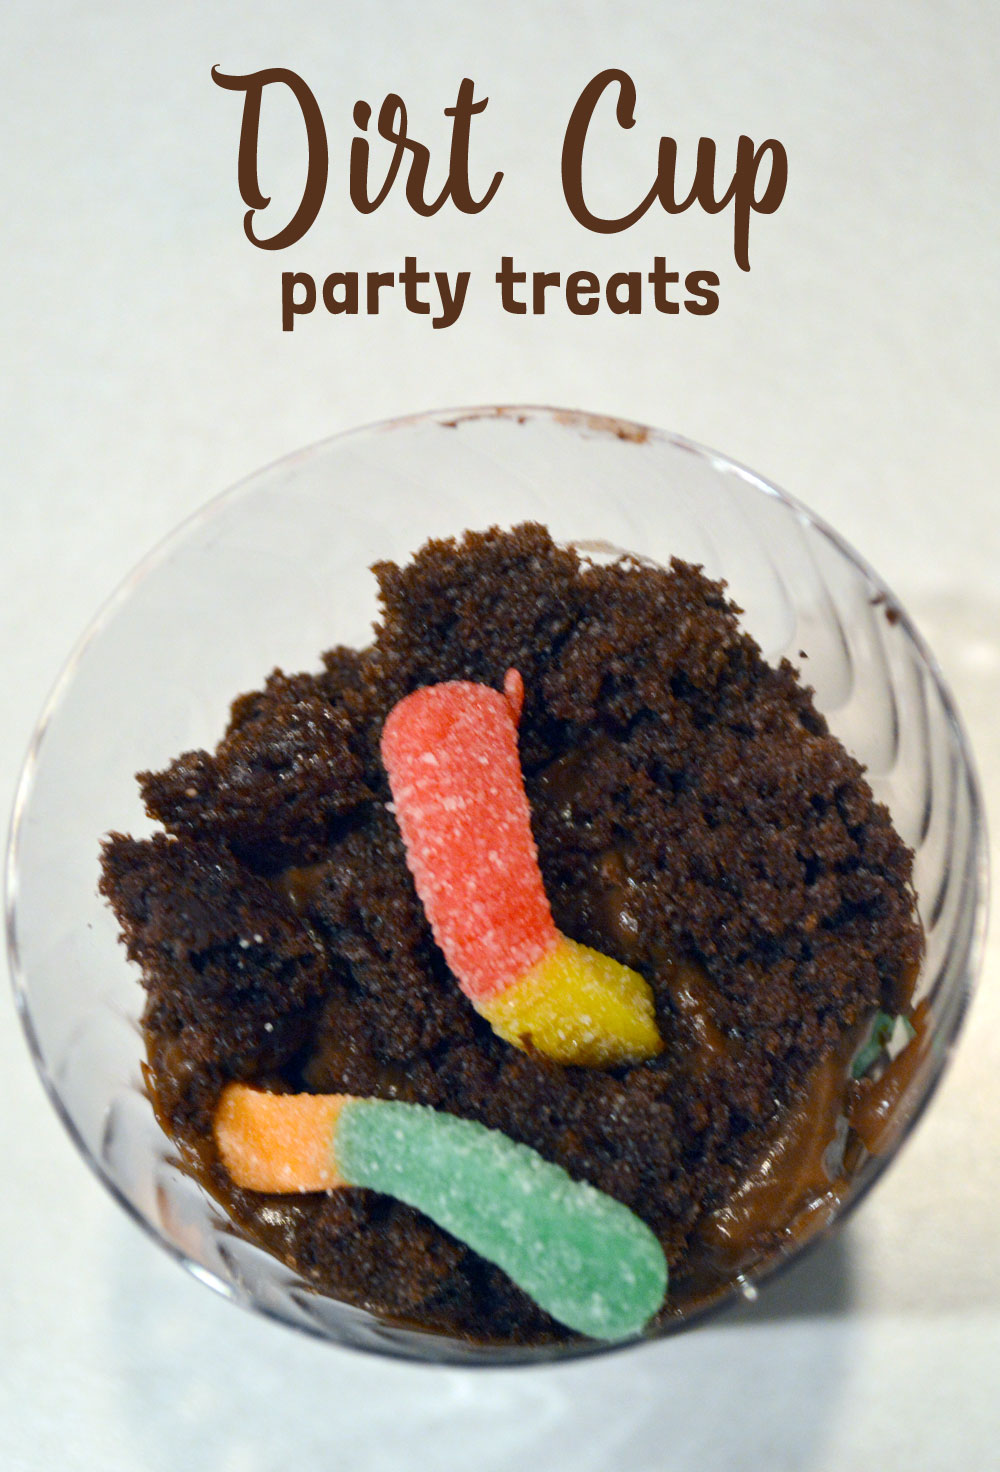 Dirt Cup creative kids party treats